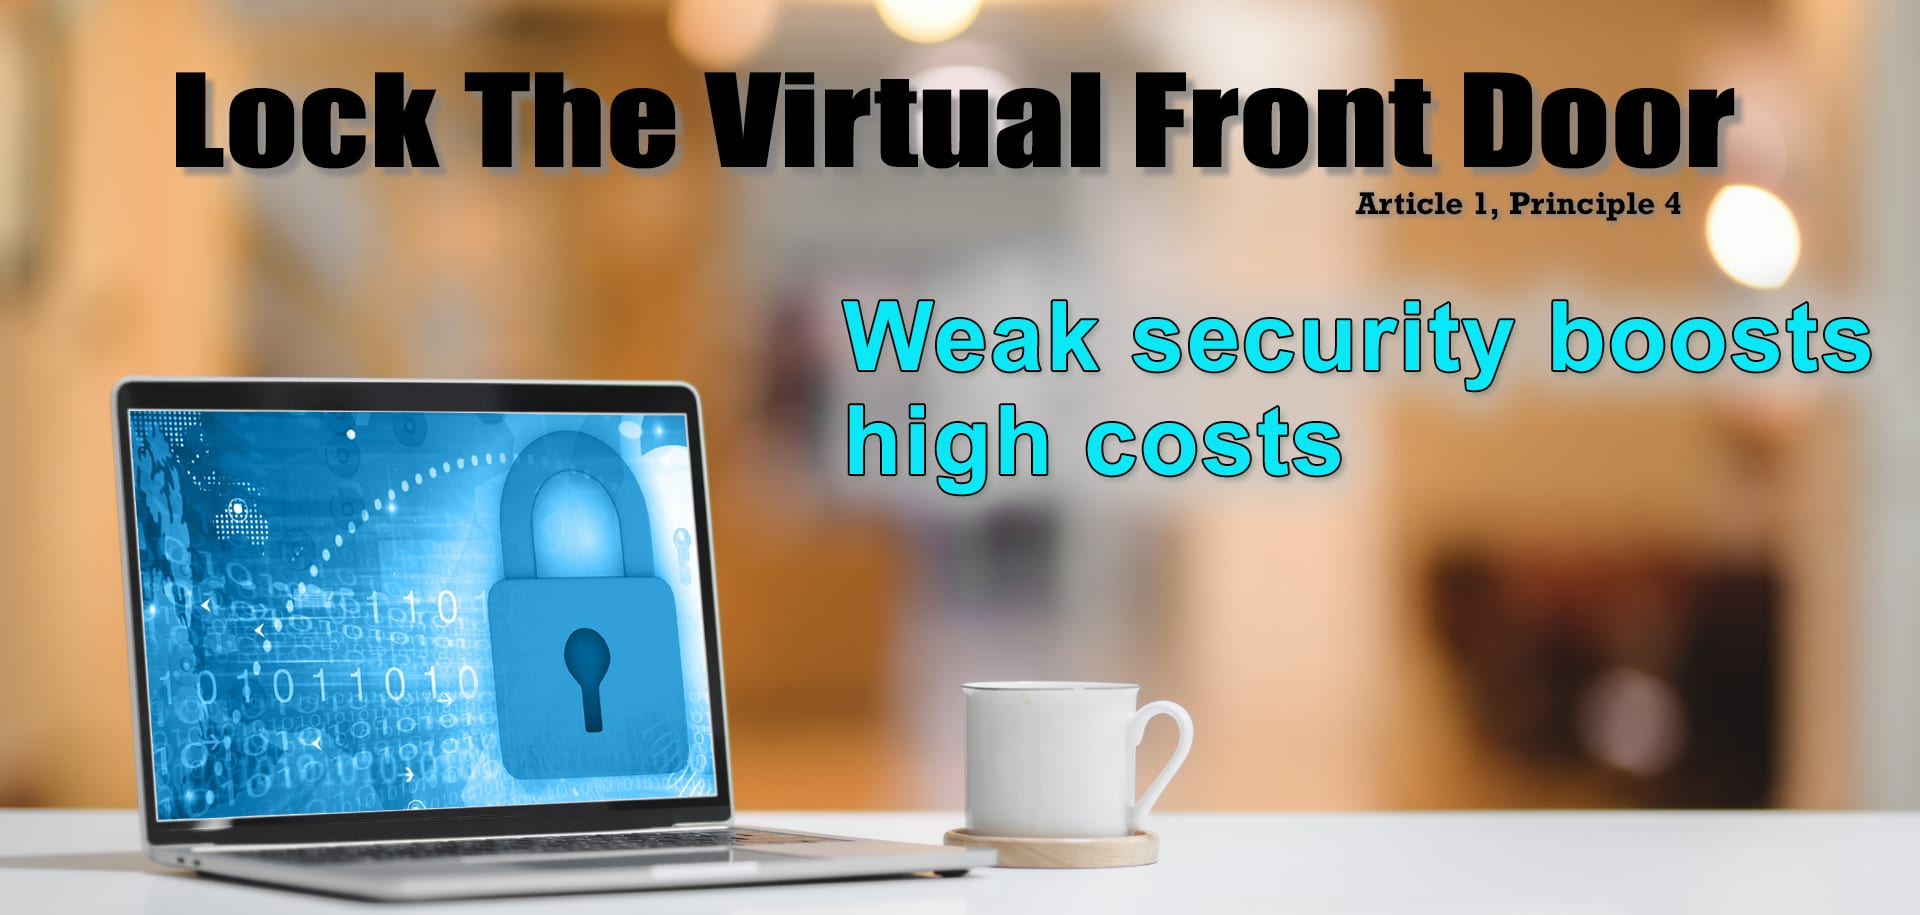 The first video of the cybersecurity tips series "Lock Your Virtual Front Door." The image shows a young woman with her left hand on the side of her face, eyes wide open, mouth open with the expression of surprise and happyness.